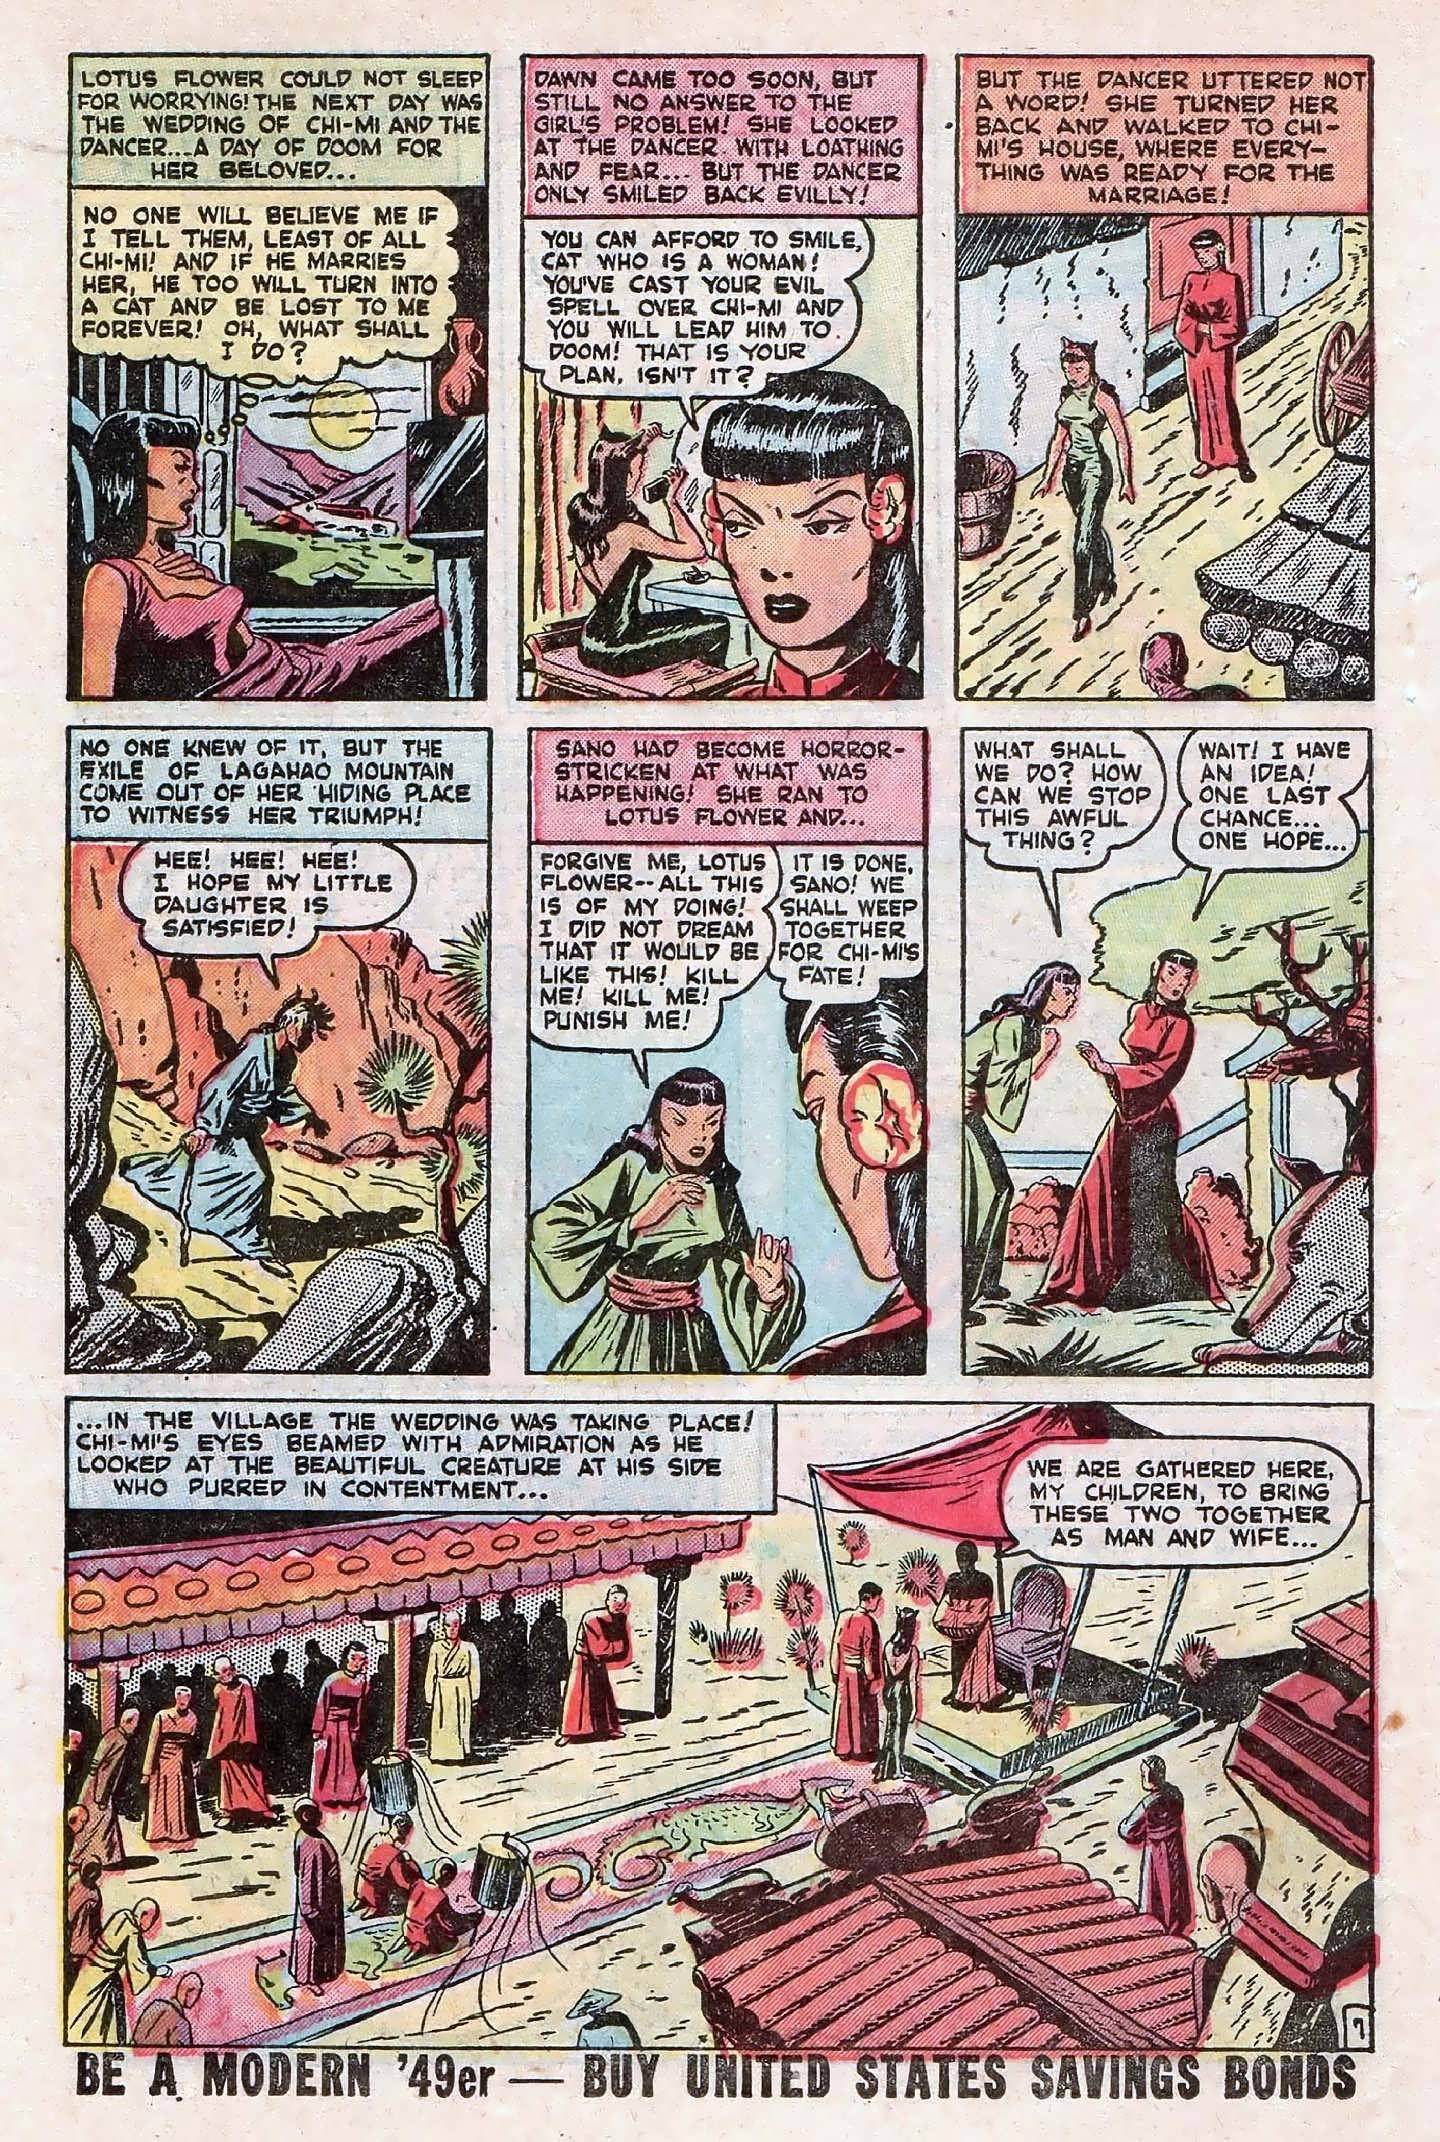 Marvel Tales (1949) 93 Page 37